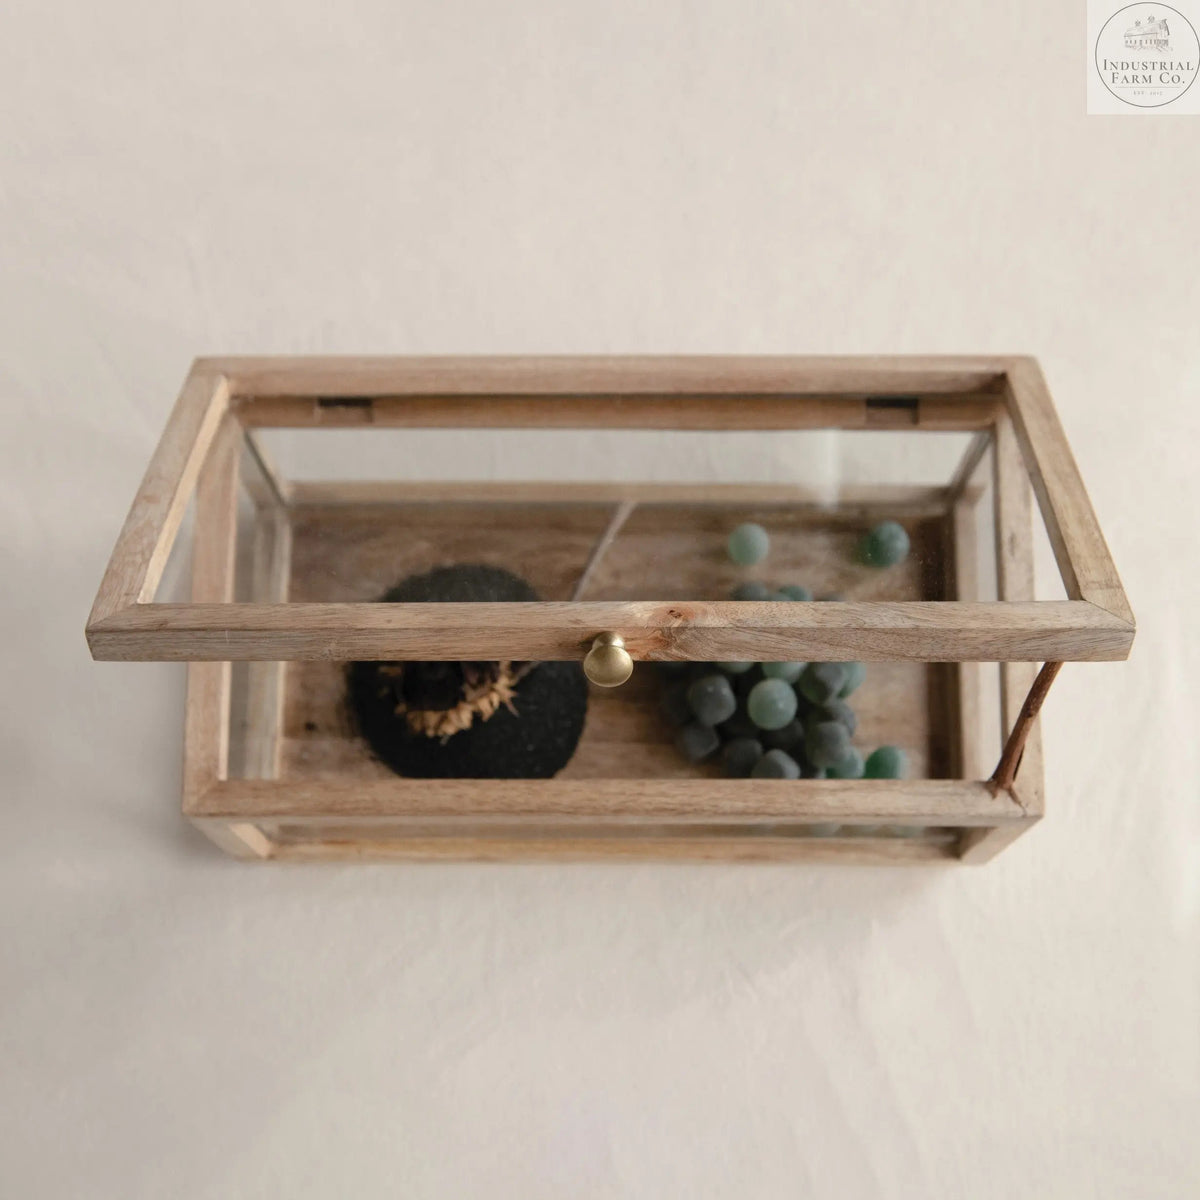 Natural Collection Wooden Decorative Display Box  Default Title   | Industrial Farm Co